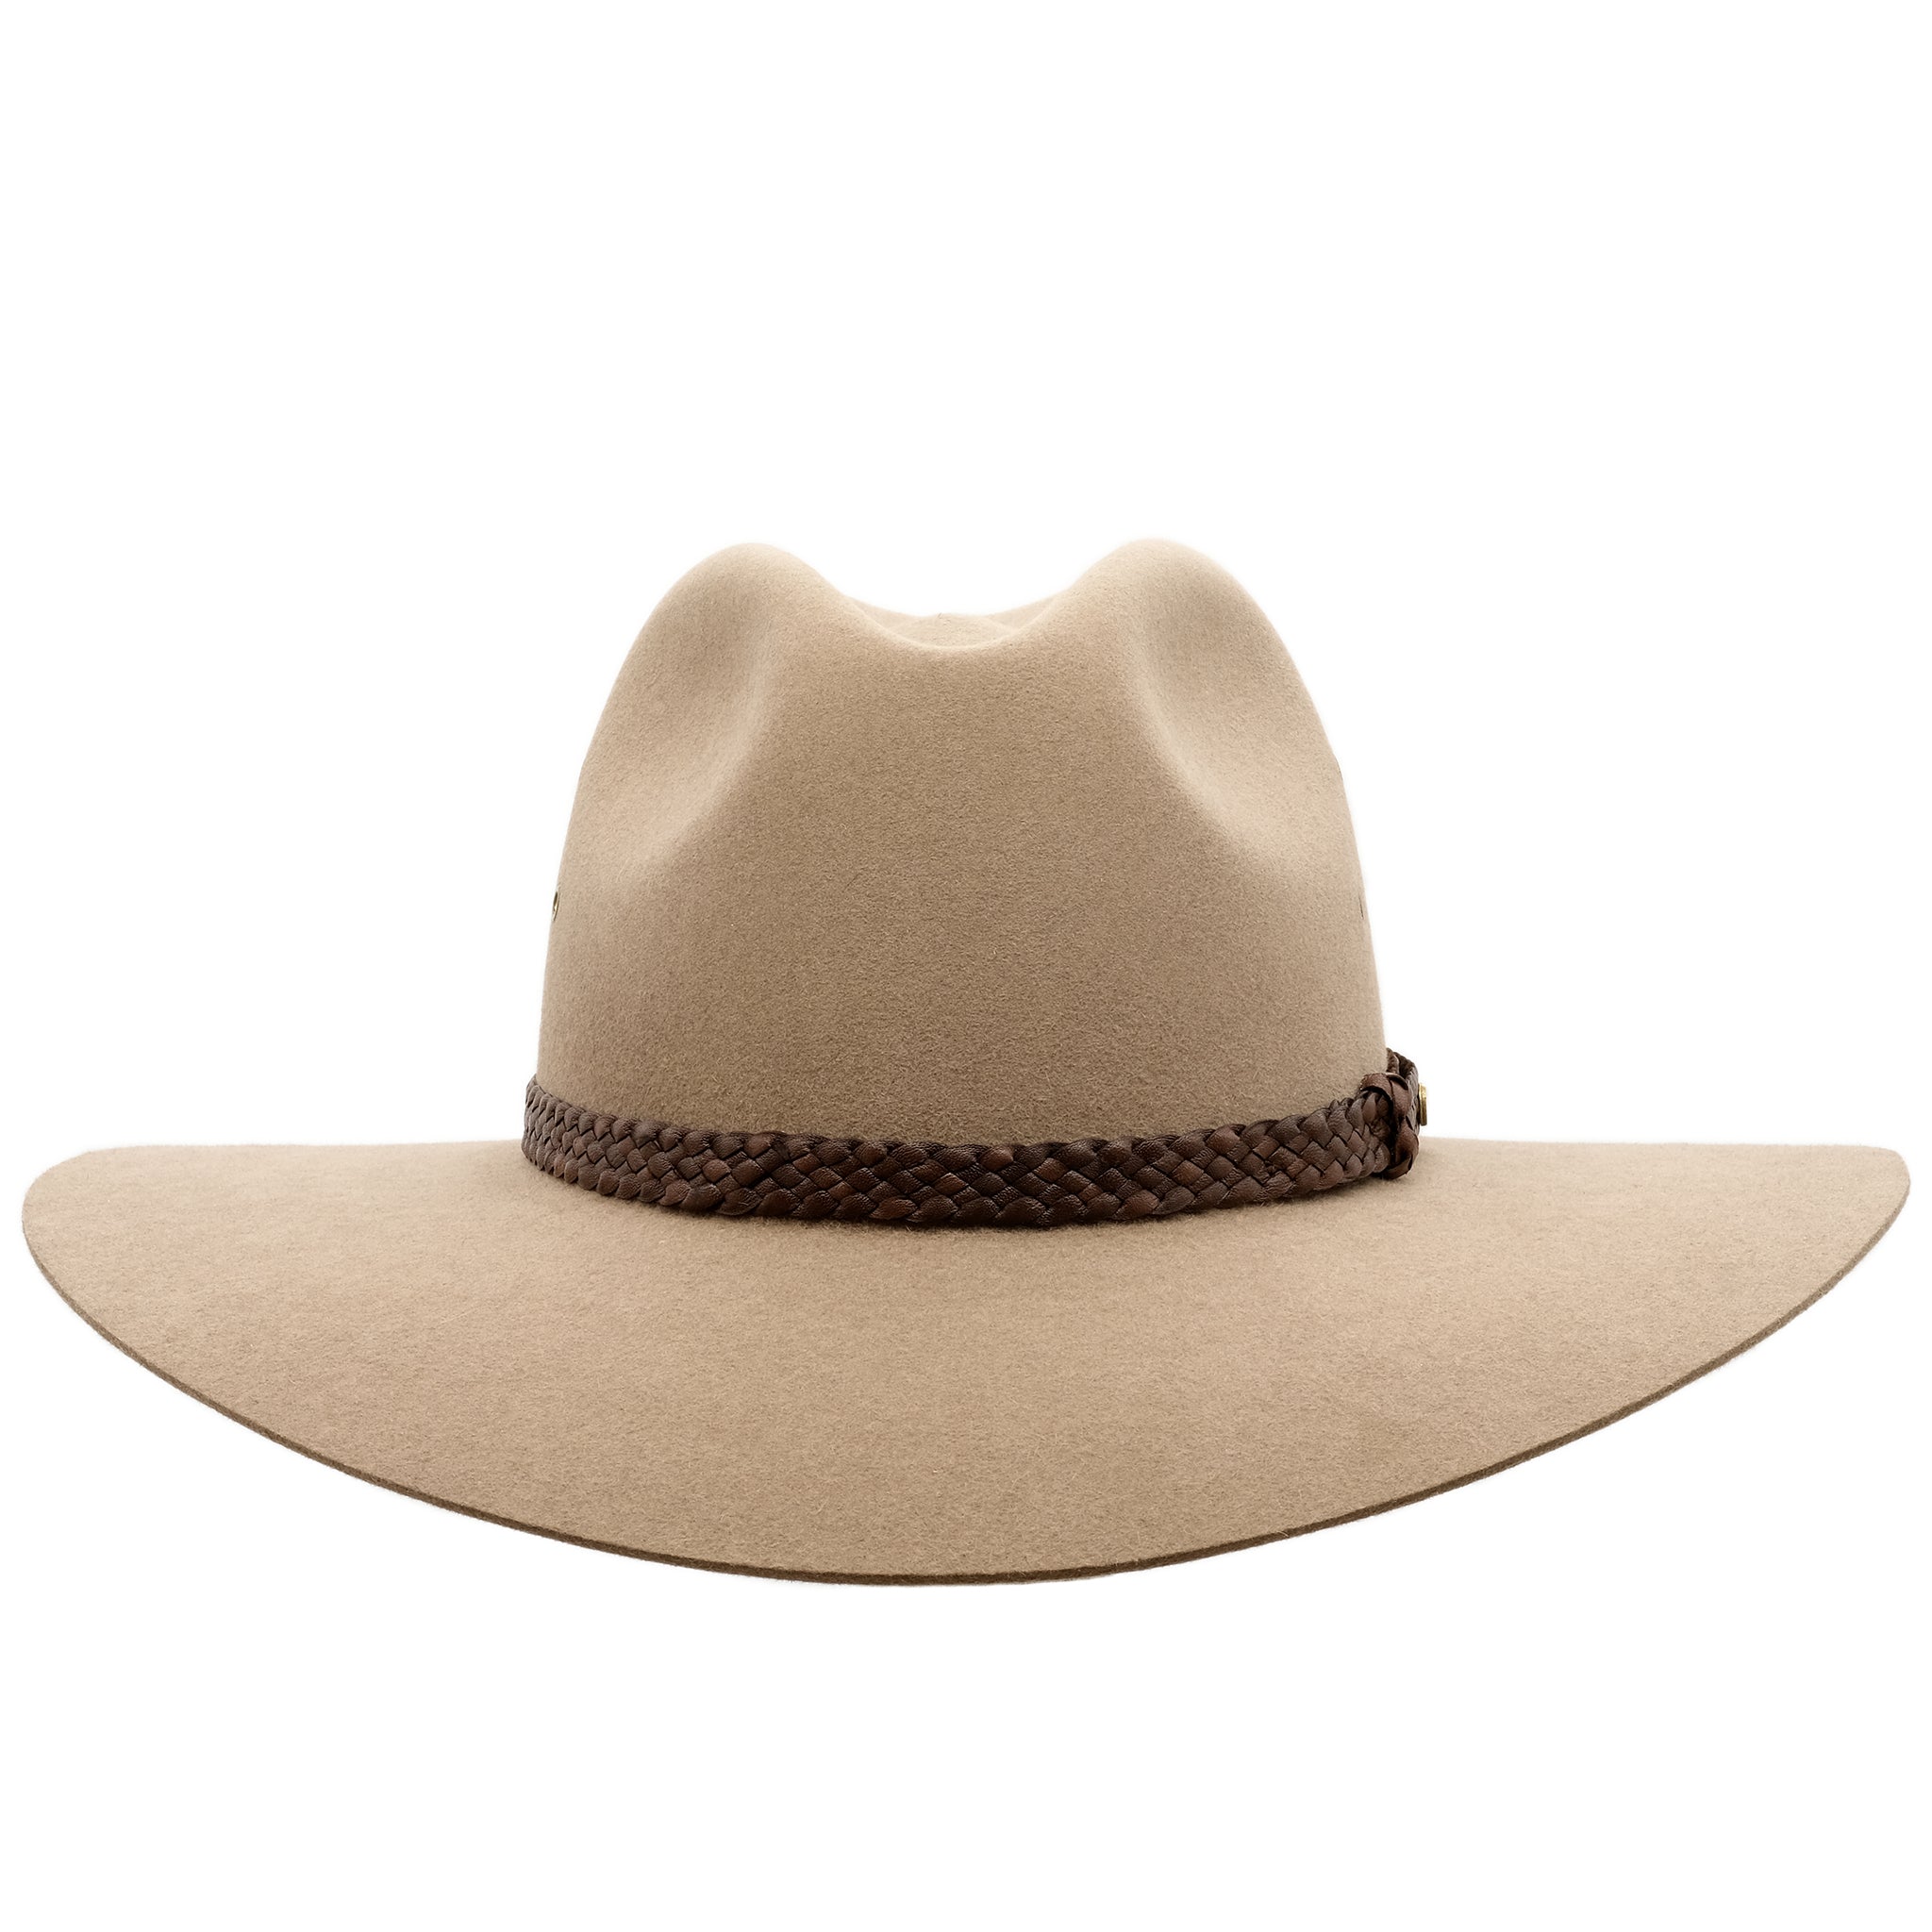 front view of the Akubra Riverina Hat in Bran colour